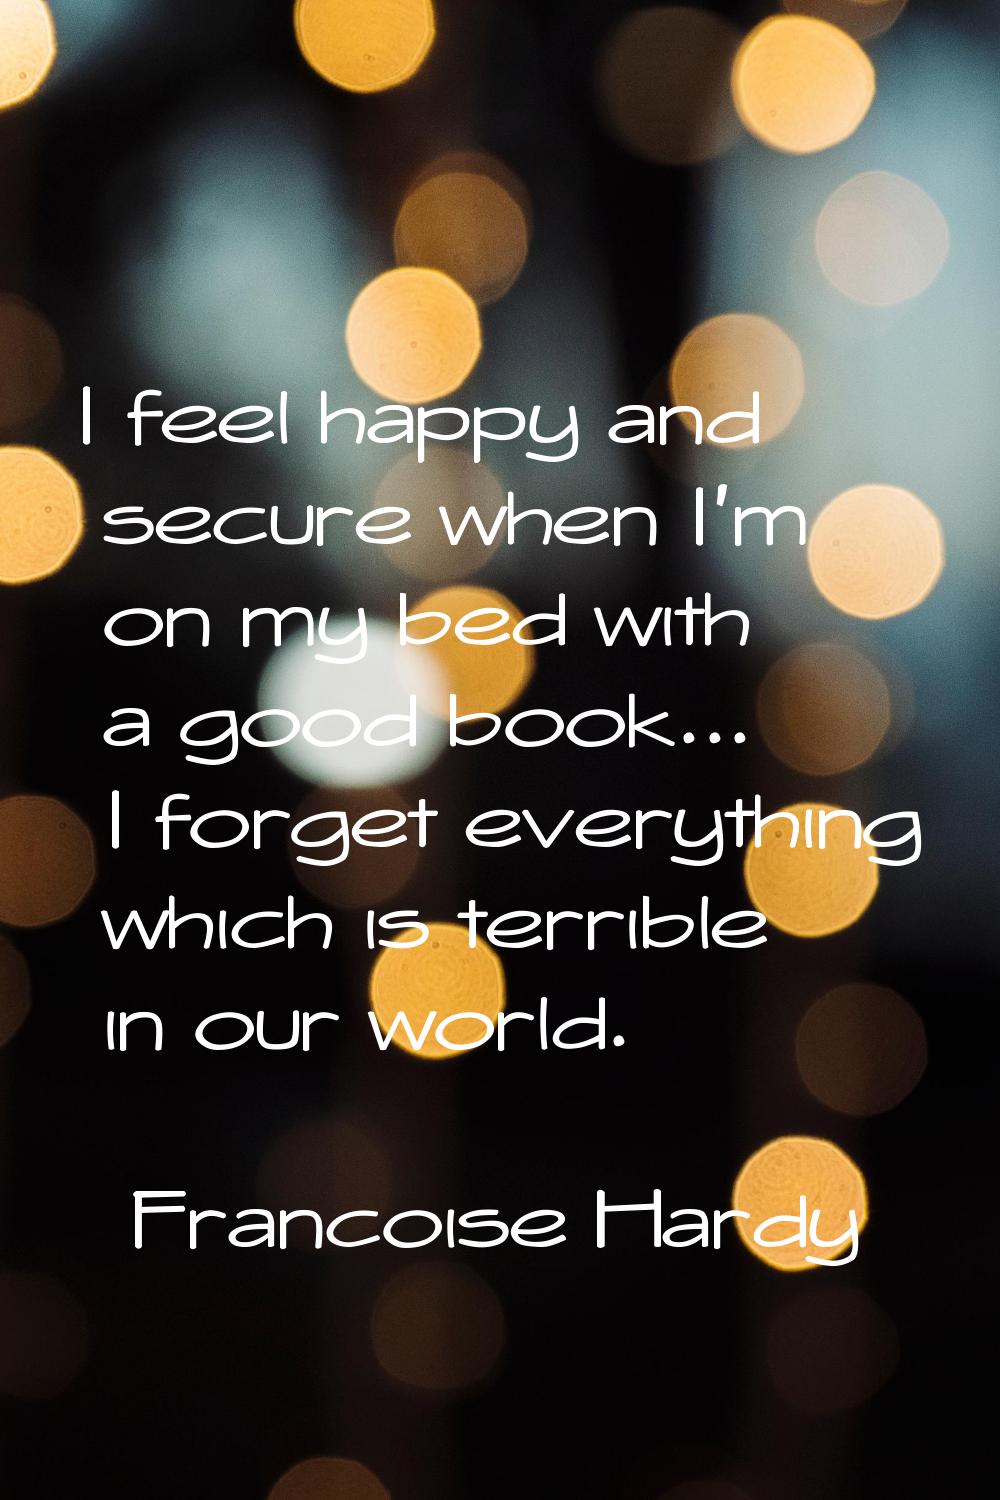 I feel happy and secure when I'm on my bed with a good book... I forget everything which is terribl